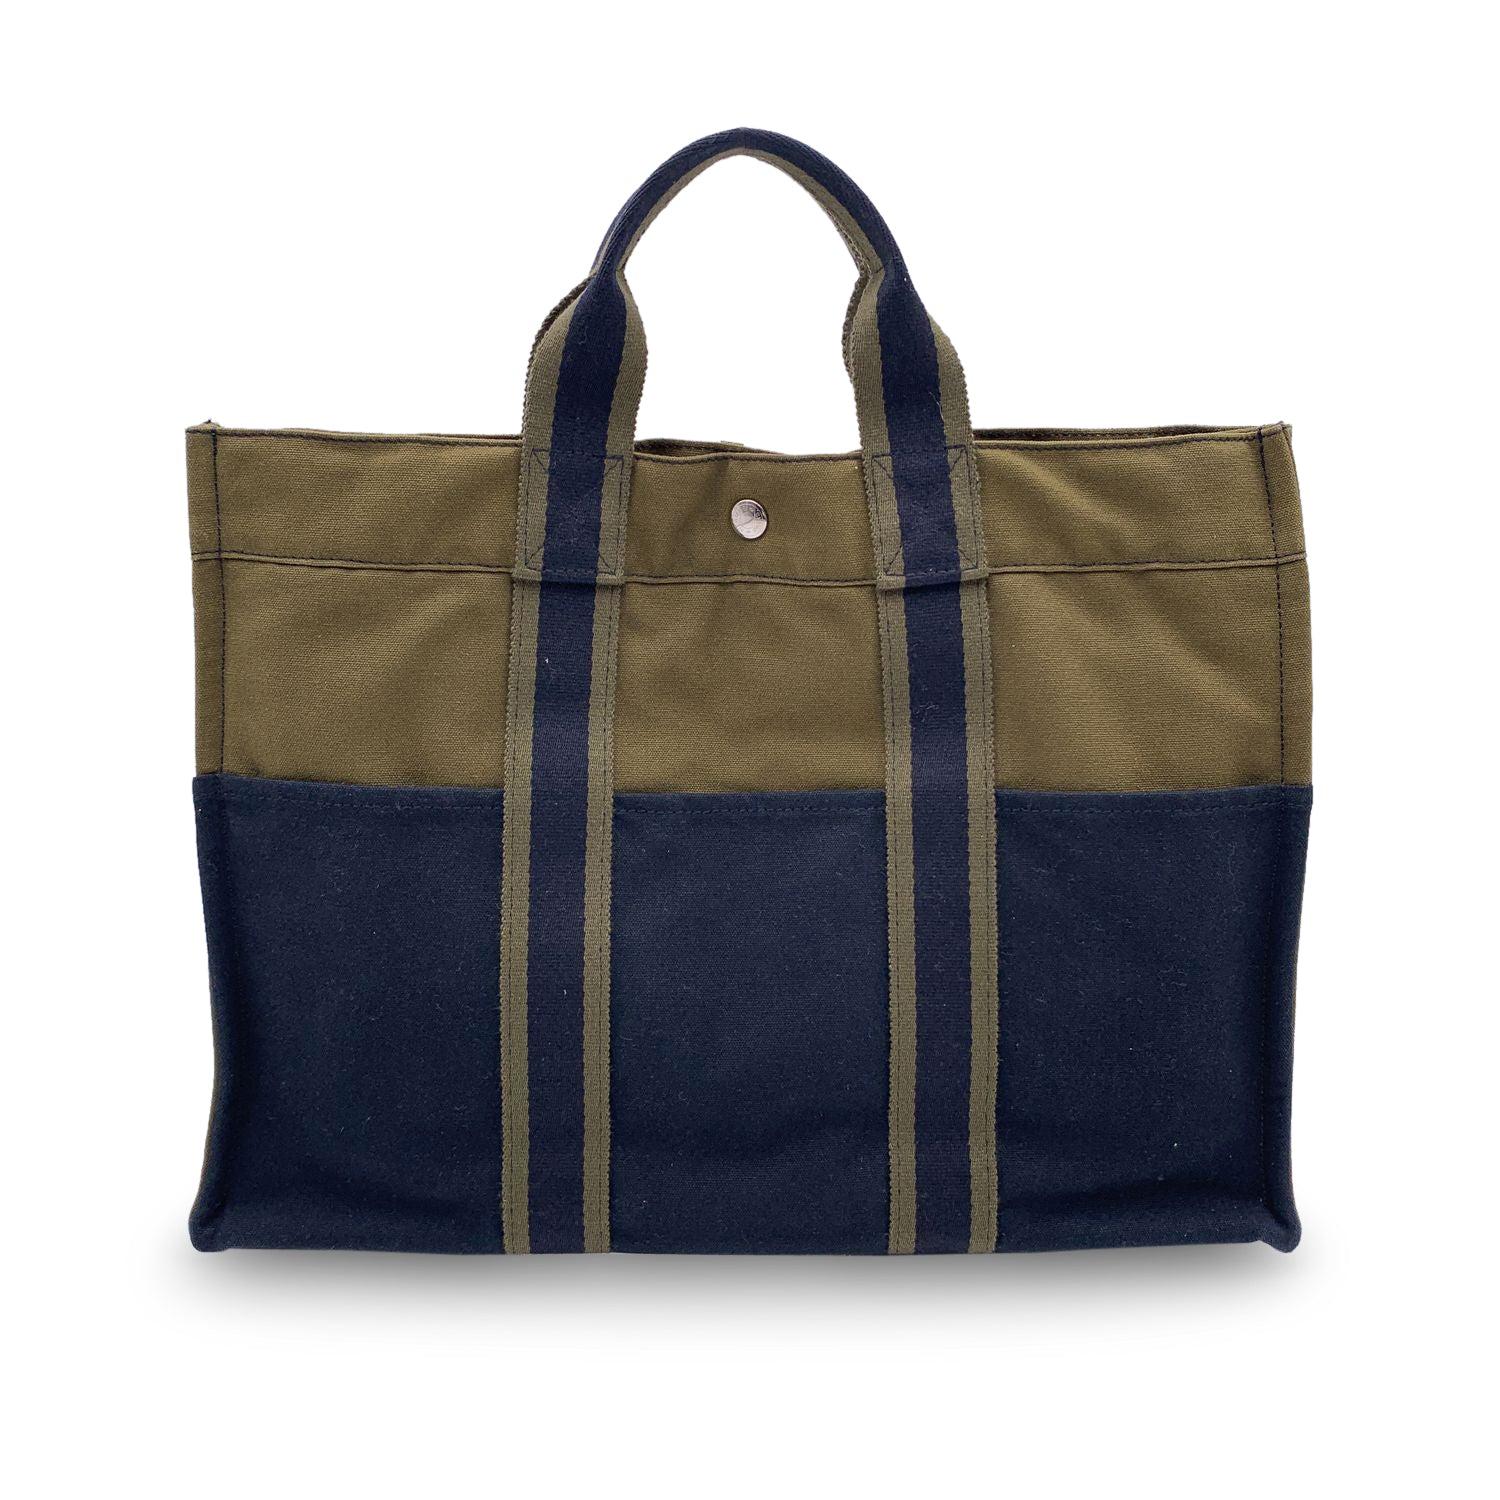 Hermes Paris Vintage green and blue cotton canvas tote, Fourre Tout MM. Made in France. Green and blue stripes. 100% Cotton. 3 front pockets on the front and 3 pockets on the back. It has snaps (buttons) on both ends for expansion. Durable canvas